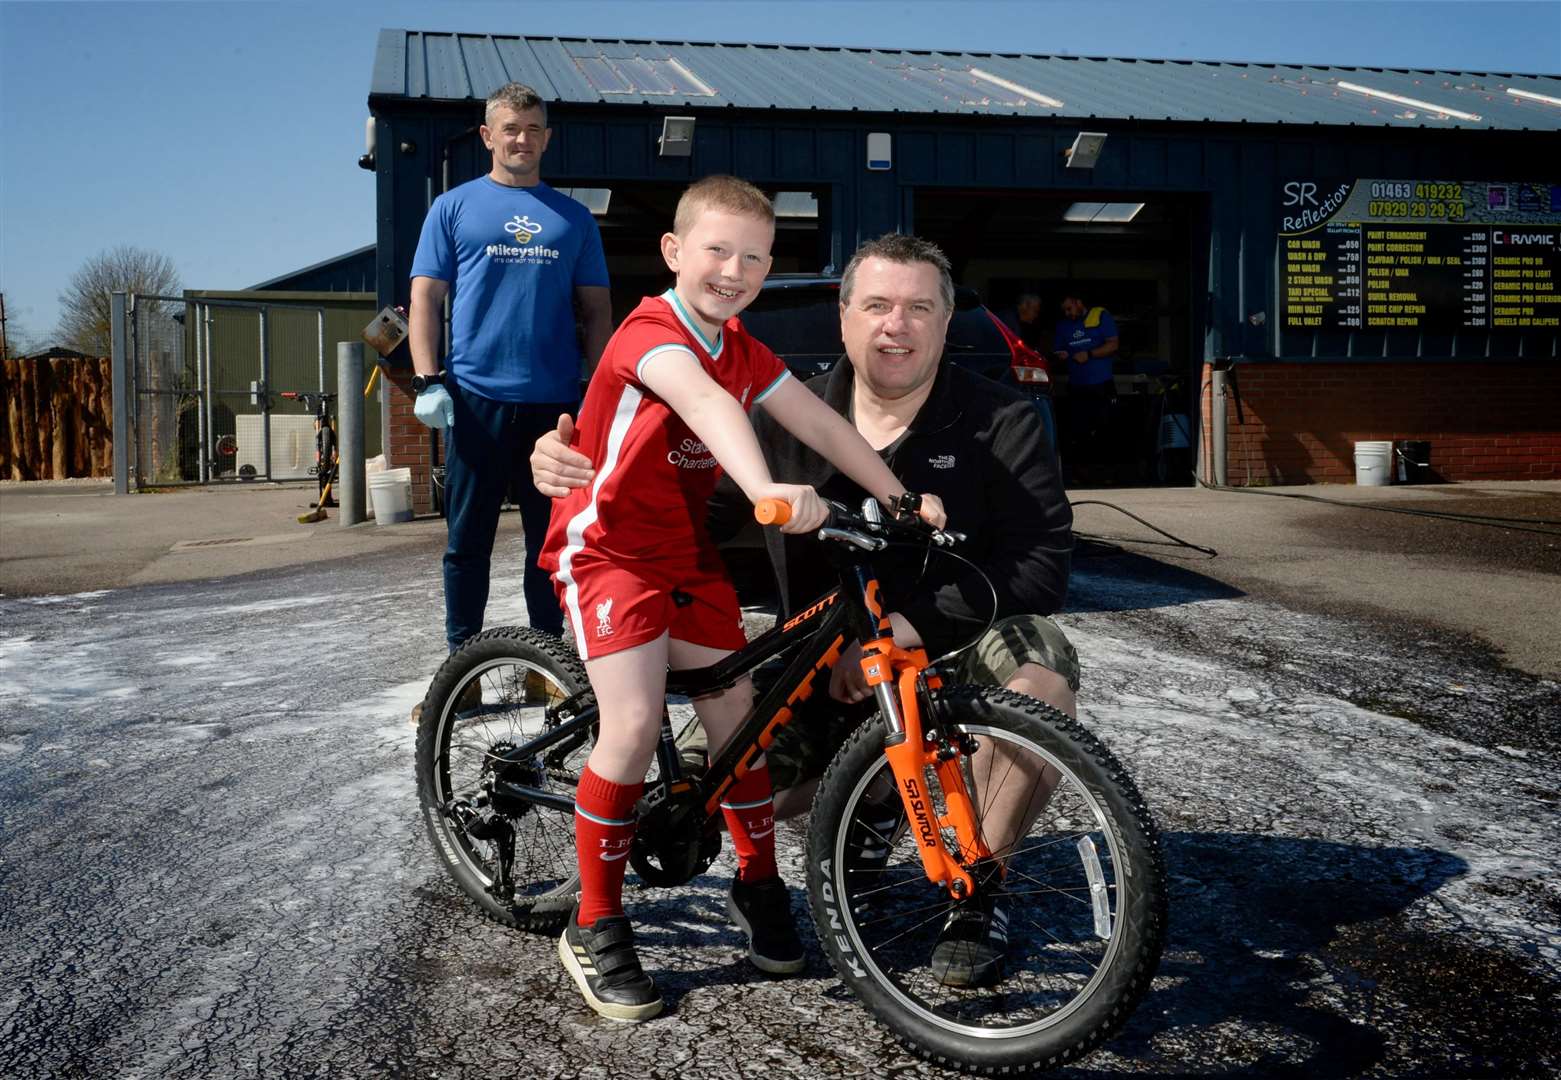 SR Reflection charity car wash..Robert Murray, owner of SR Reflection presenting one of the bikes to Archie Maclean, who raised Â£65 for Mikeysline by cycling 60 miles on his old bike, with his dad, Angus Maclean..Picture: James Mackenzie..